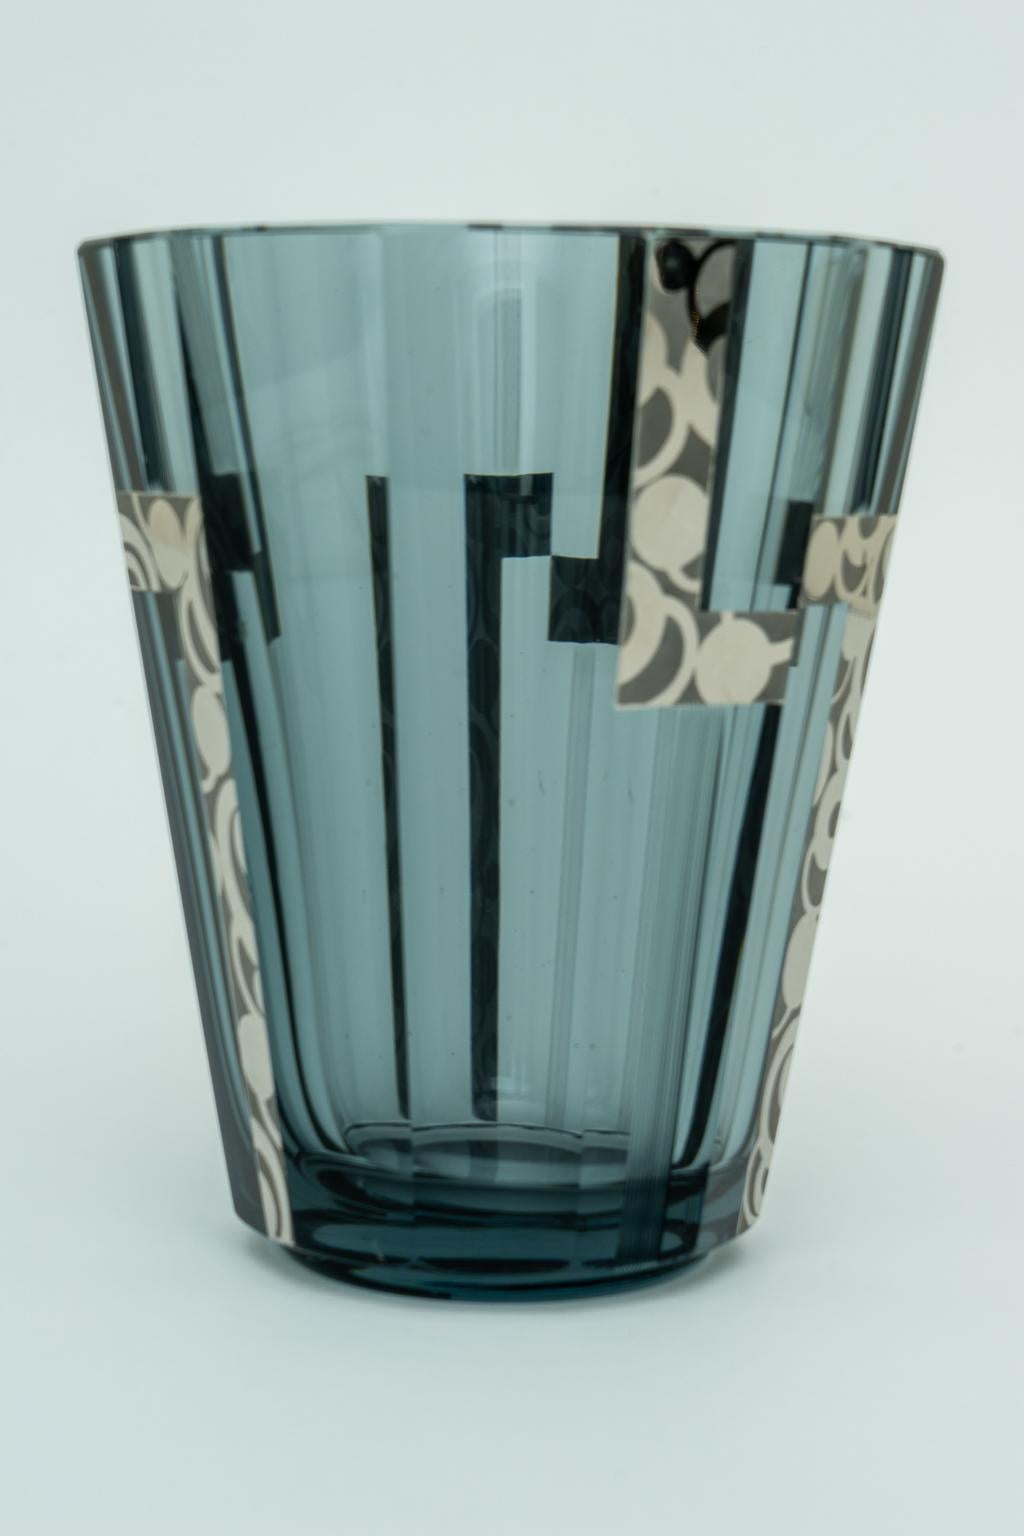 This stylish Art Deco vase is very much in the manner of pieces created by Joseph Hoffman and it was acquired from a Palm Beach estate, and it dates to the 1920s-1930s.